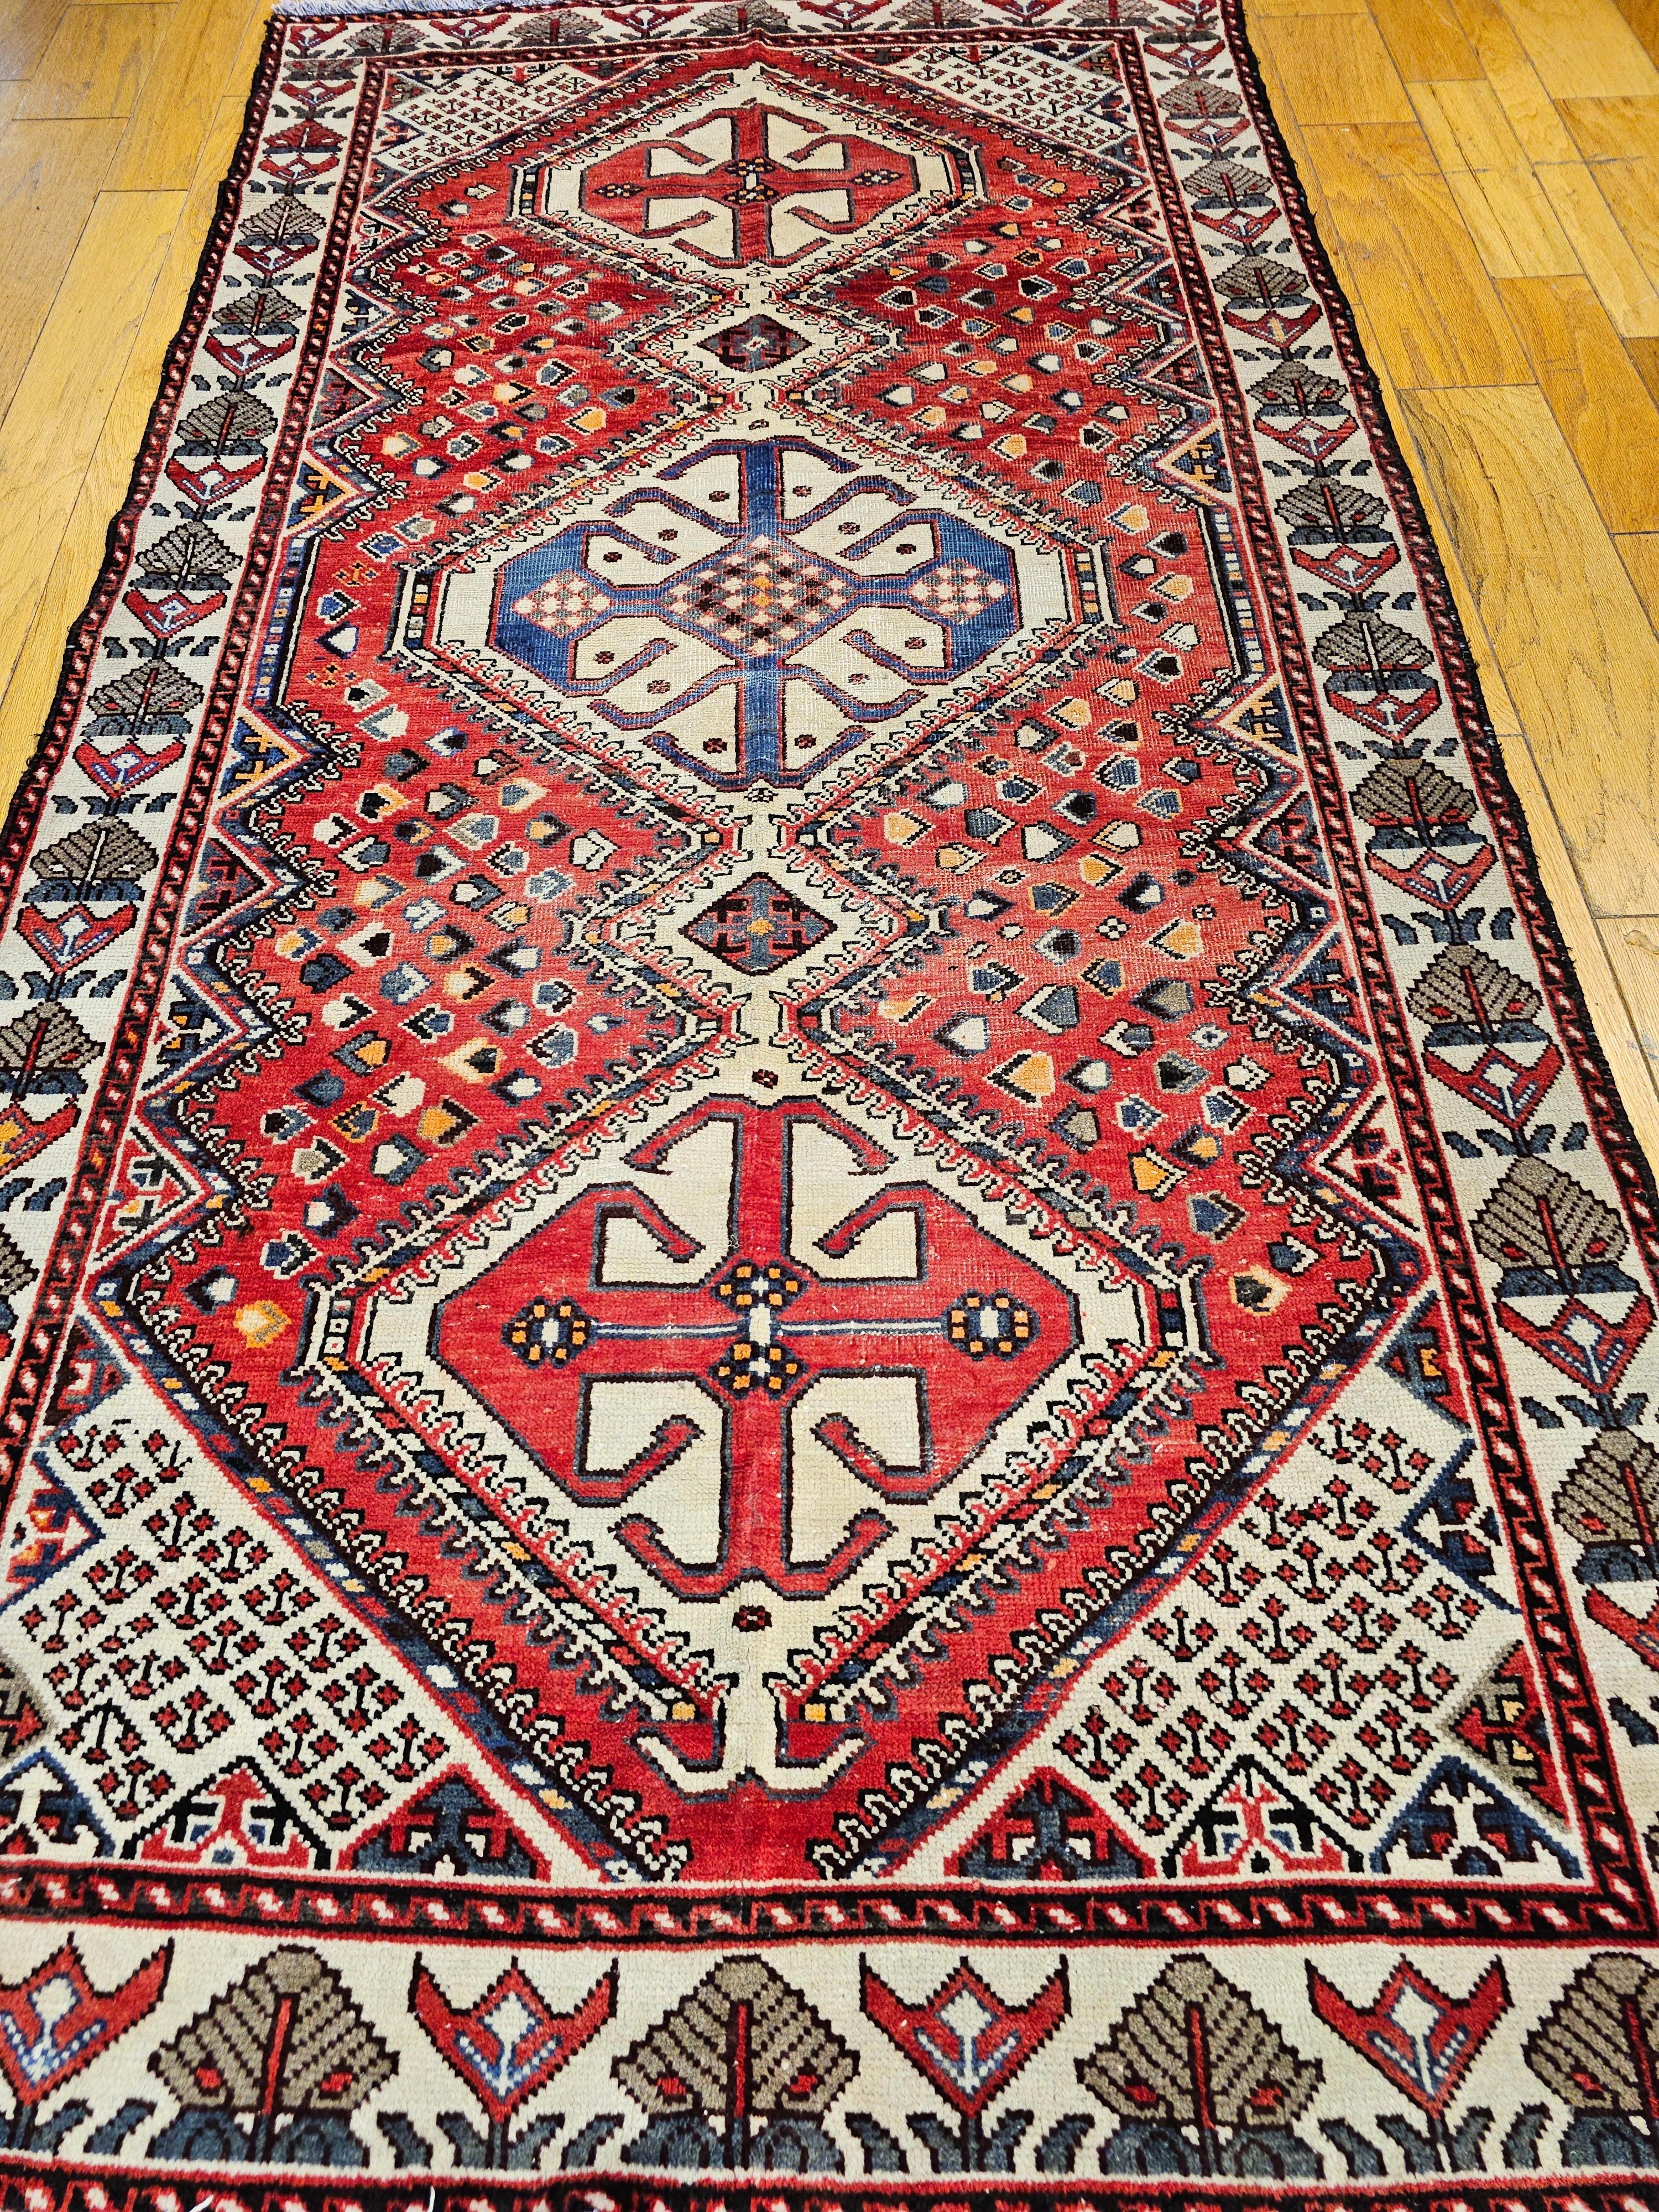  Vintage Persian Hand-Knotted gallery or room size rug from the Shiraz region of Western Persia circa the mid 1900s.  The tribal design rug, similar to Qashqai rugs, comes with traditional three vertical medallions which is “Shiraz Signature”